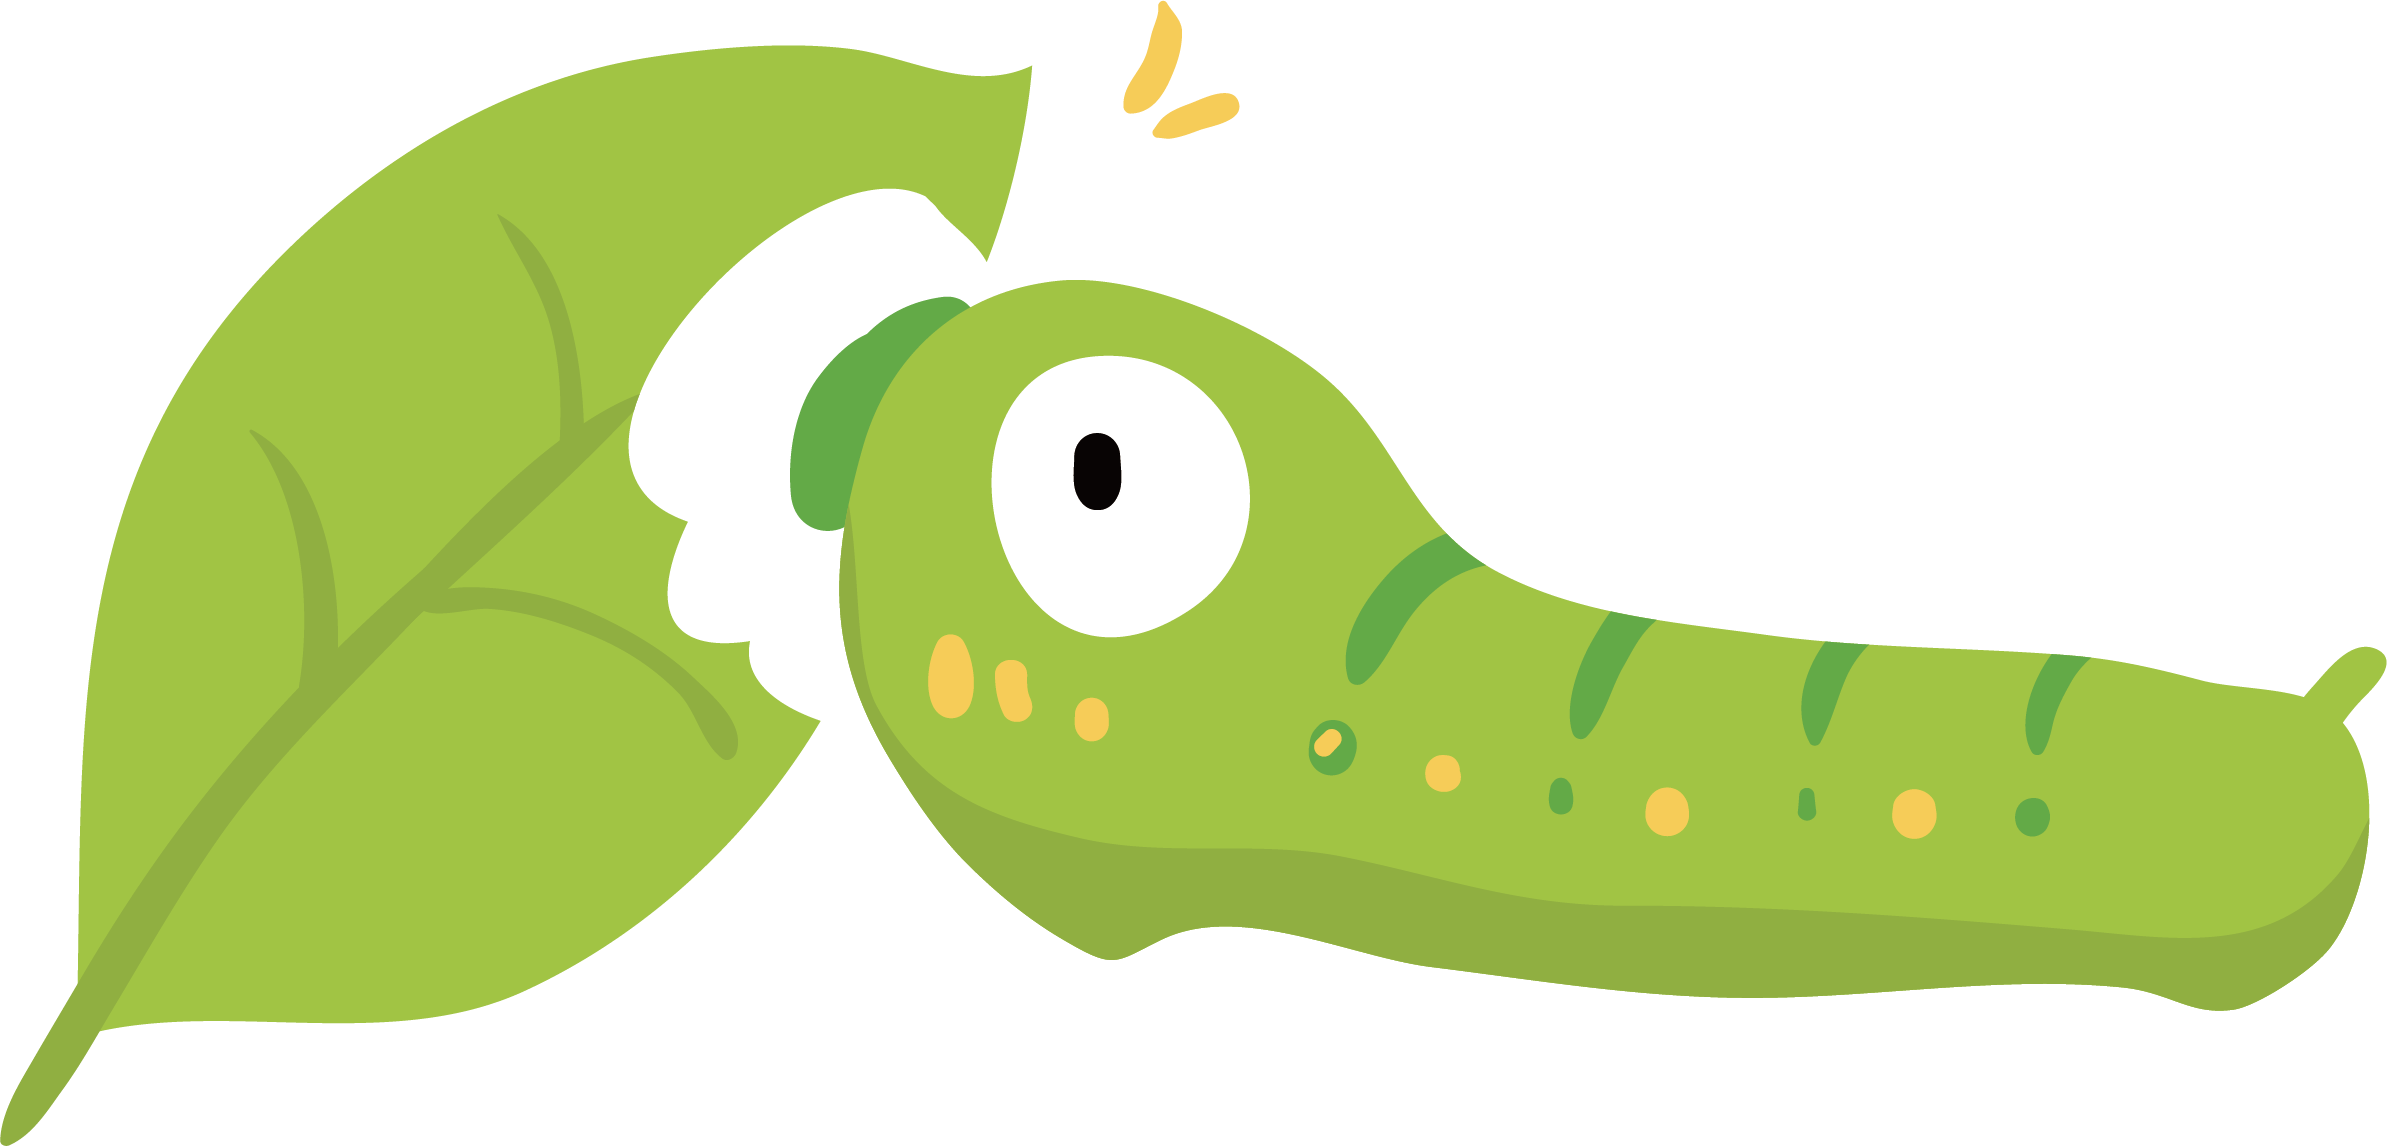 Green Insect Illustration - Vector Graphics (2387x1146)